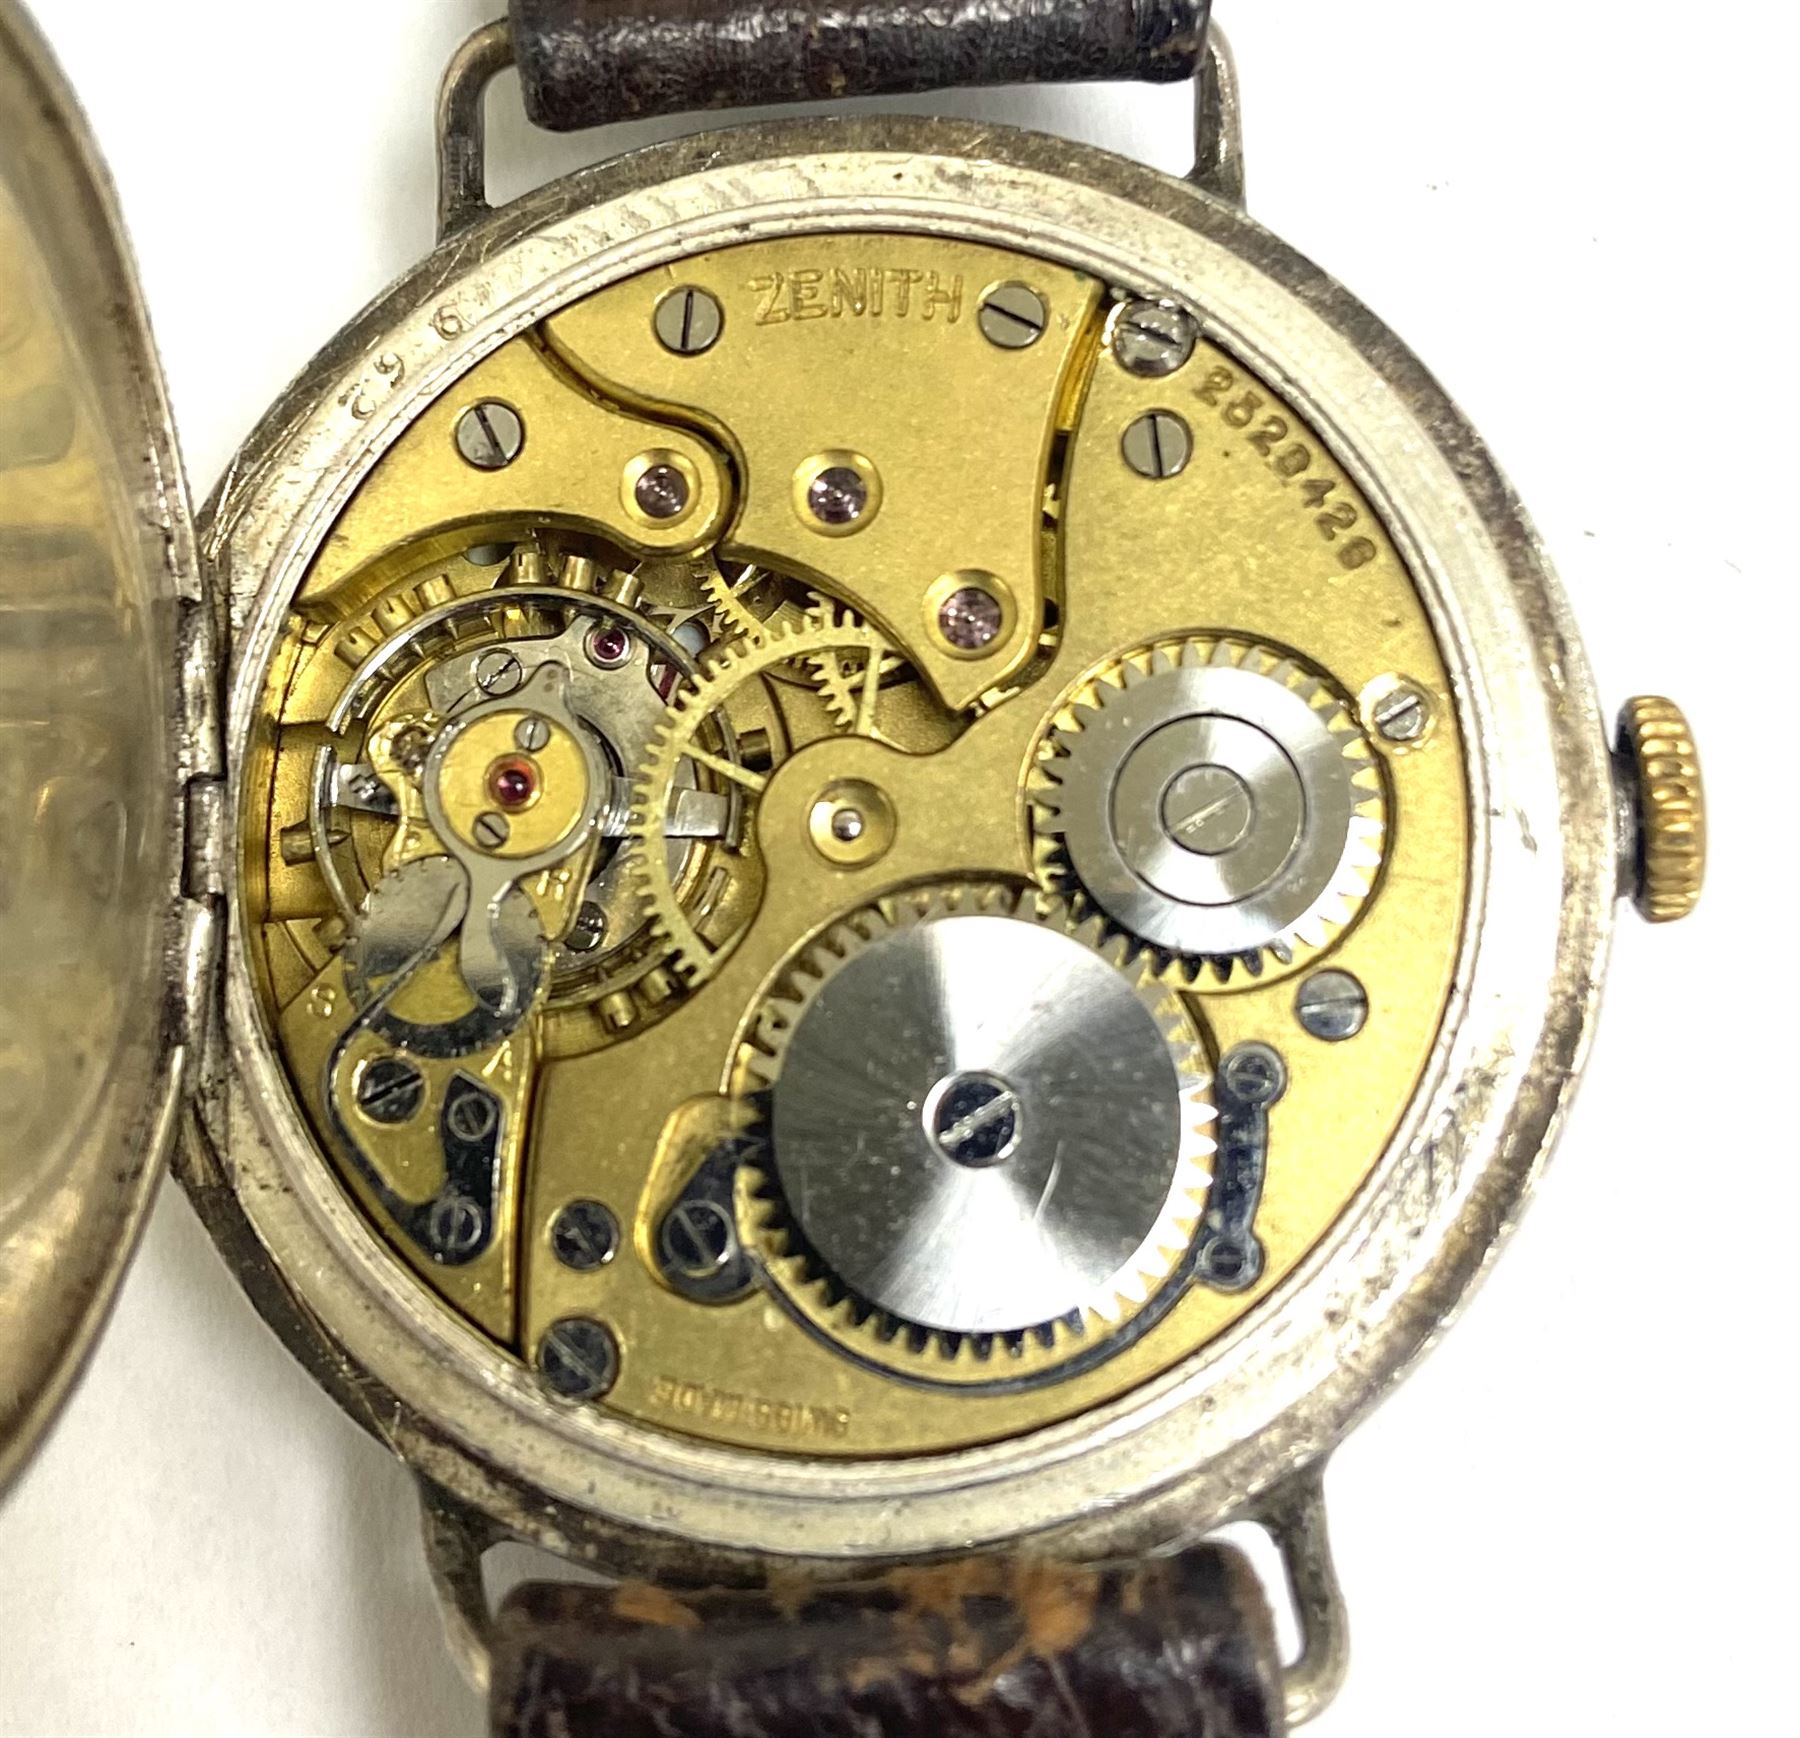 Zenith early 20th century silver manual wind wristwatch - Image 3 of 4